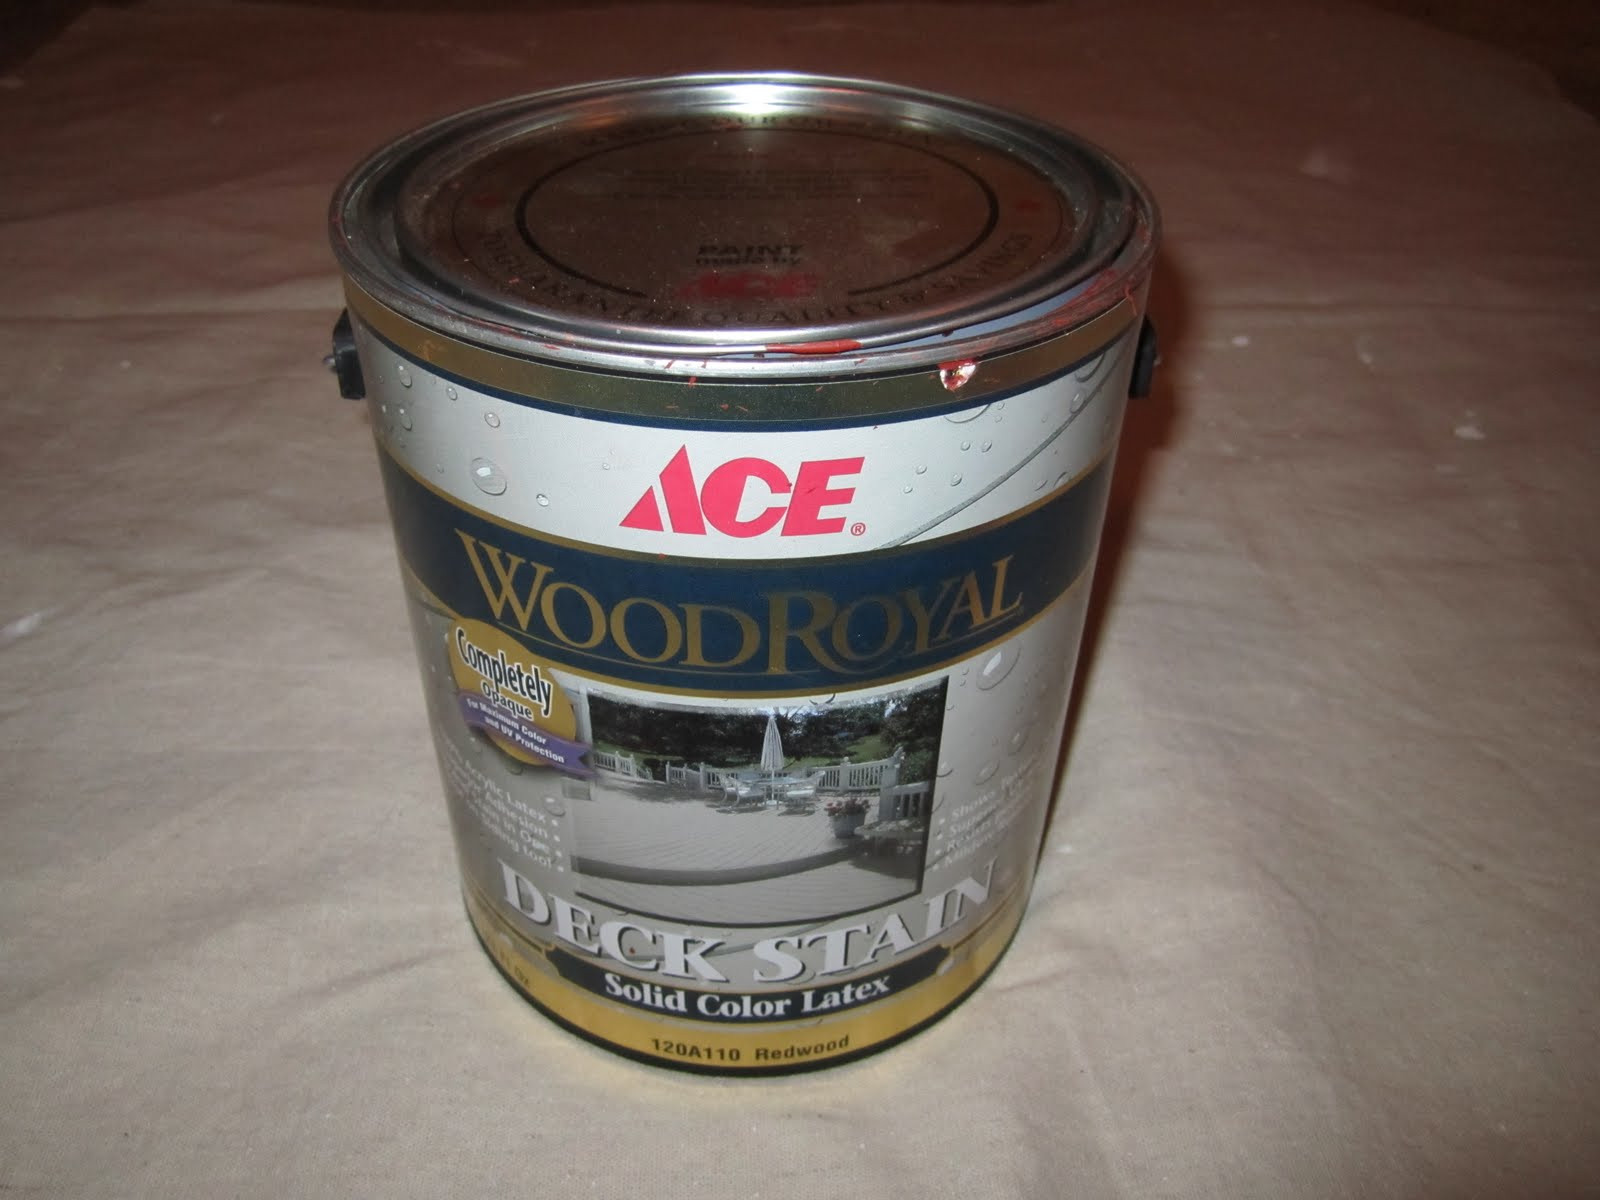 Ace Hardware Deck Paint
 Ace Wood Royal Solid Color Latex Deck Stain Review